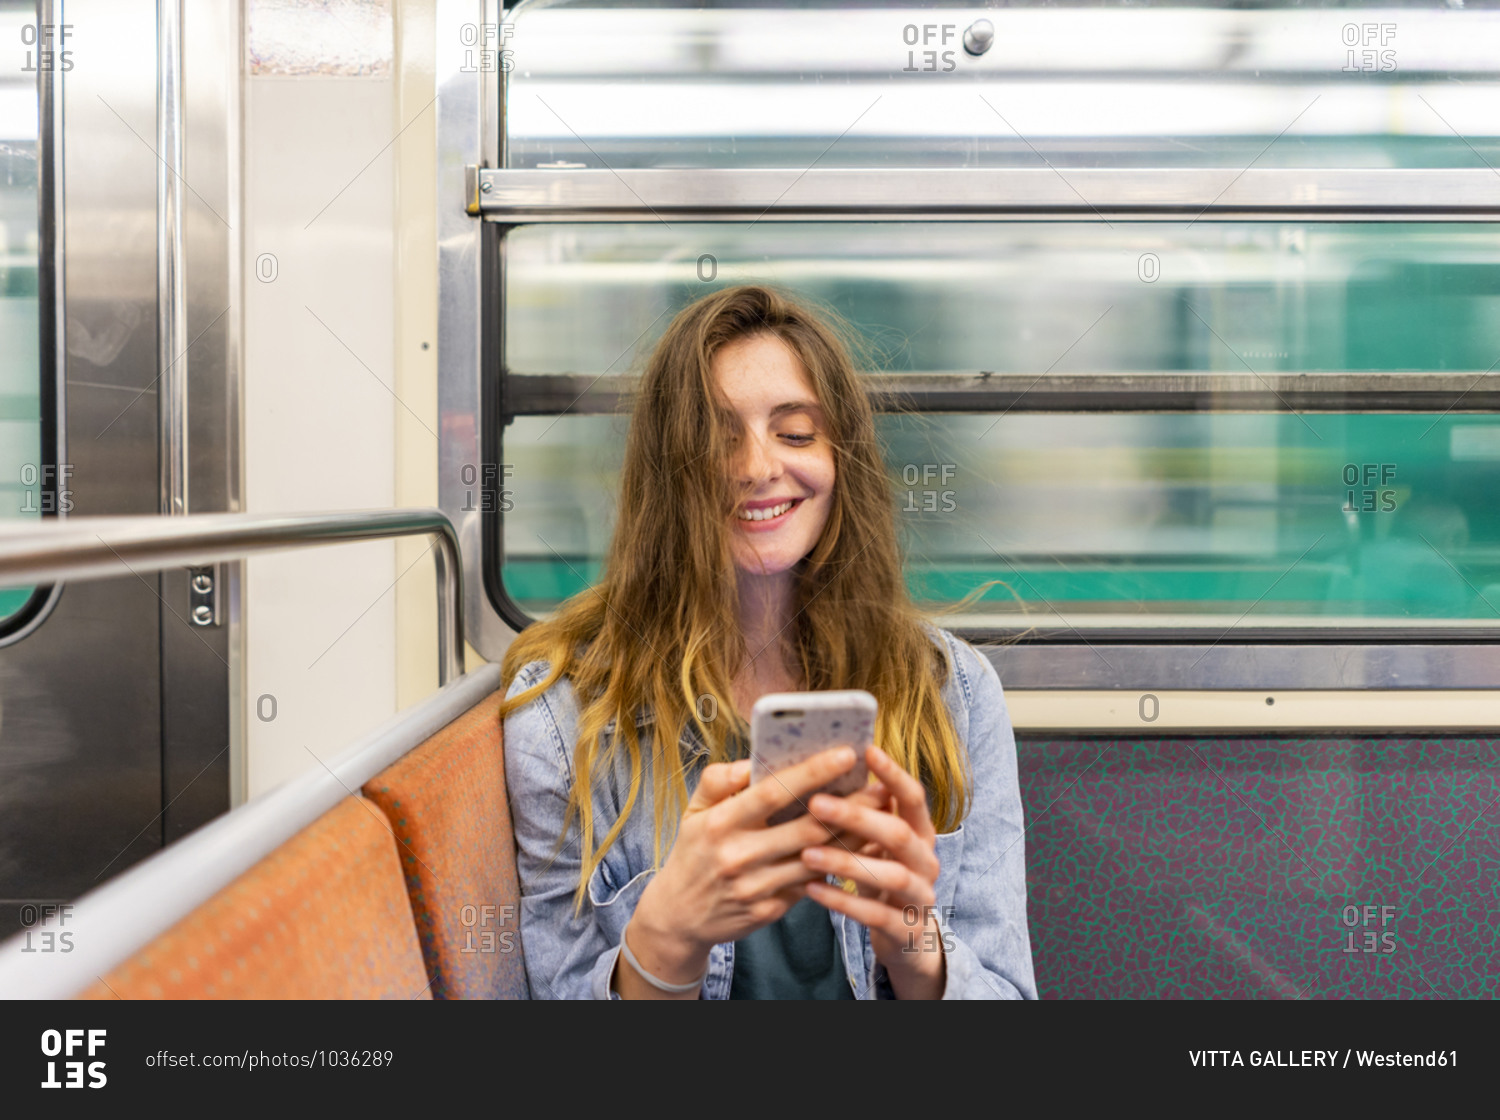 Portrait of smiling young woman in underground train looking at smartphone